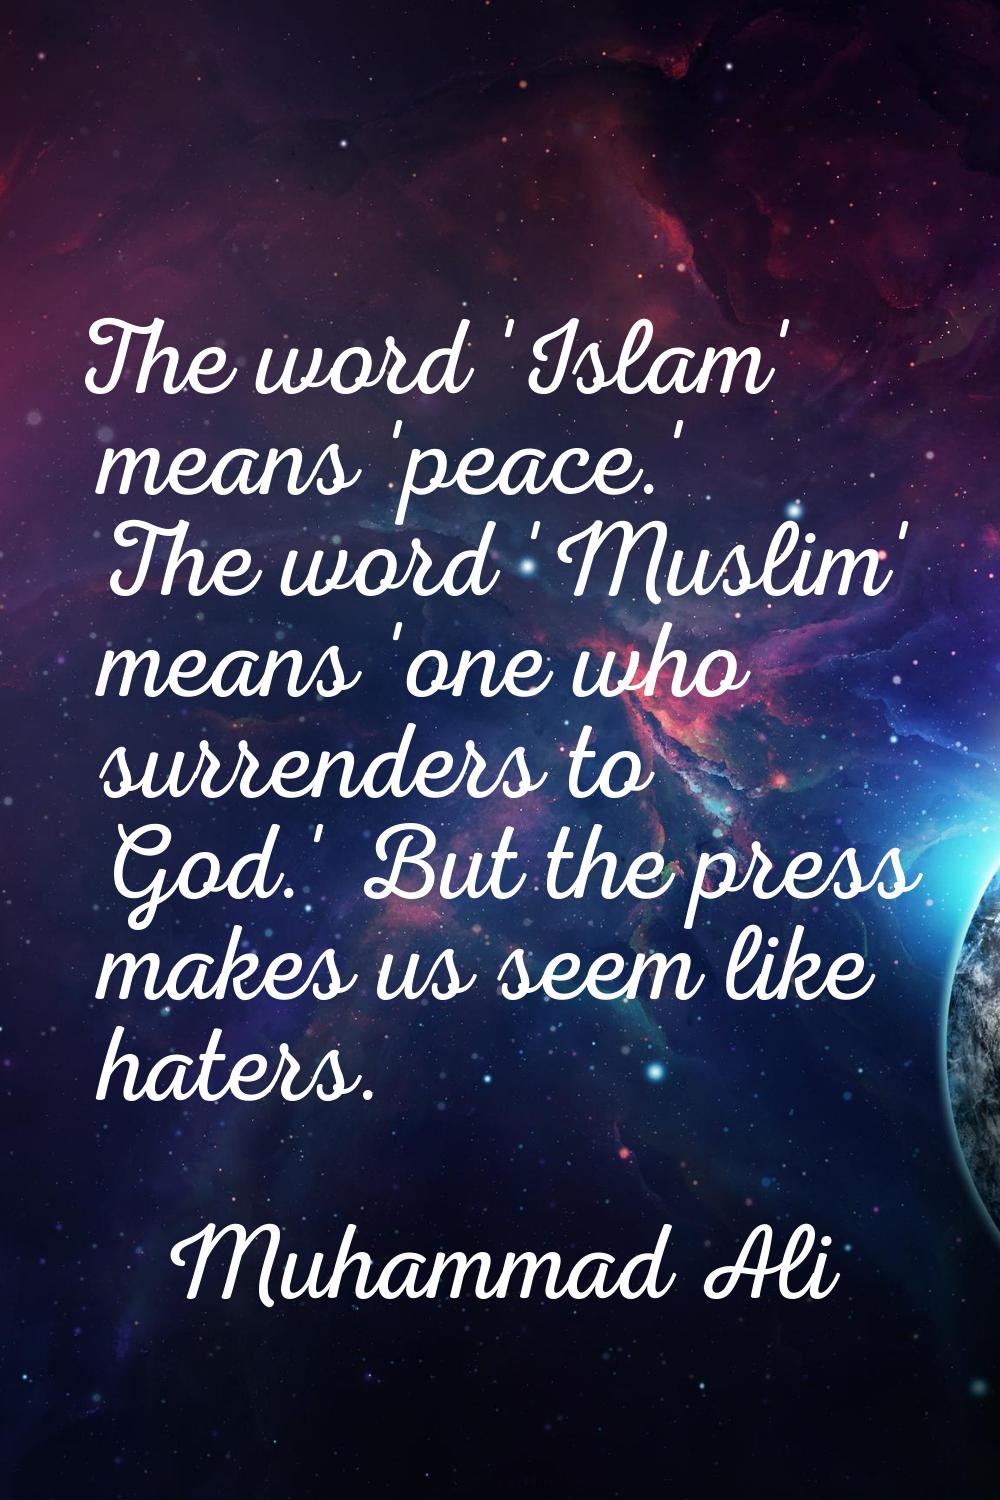 The word 'Islam' means 'peace.' The word 'Muslim' means 'one who surrenders to God.' But the press 